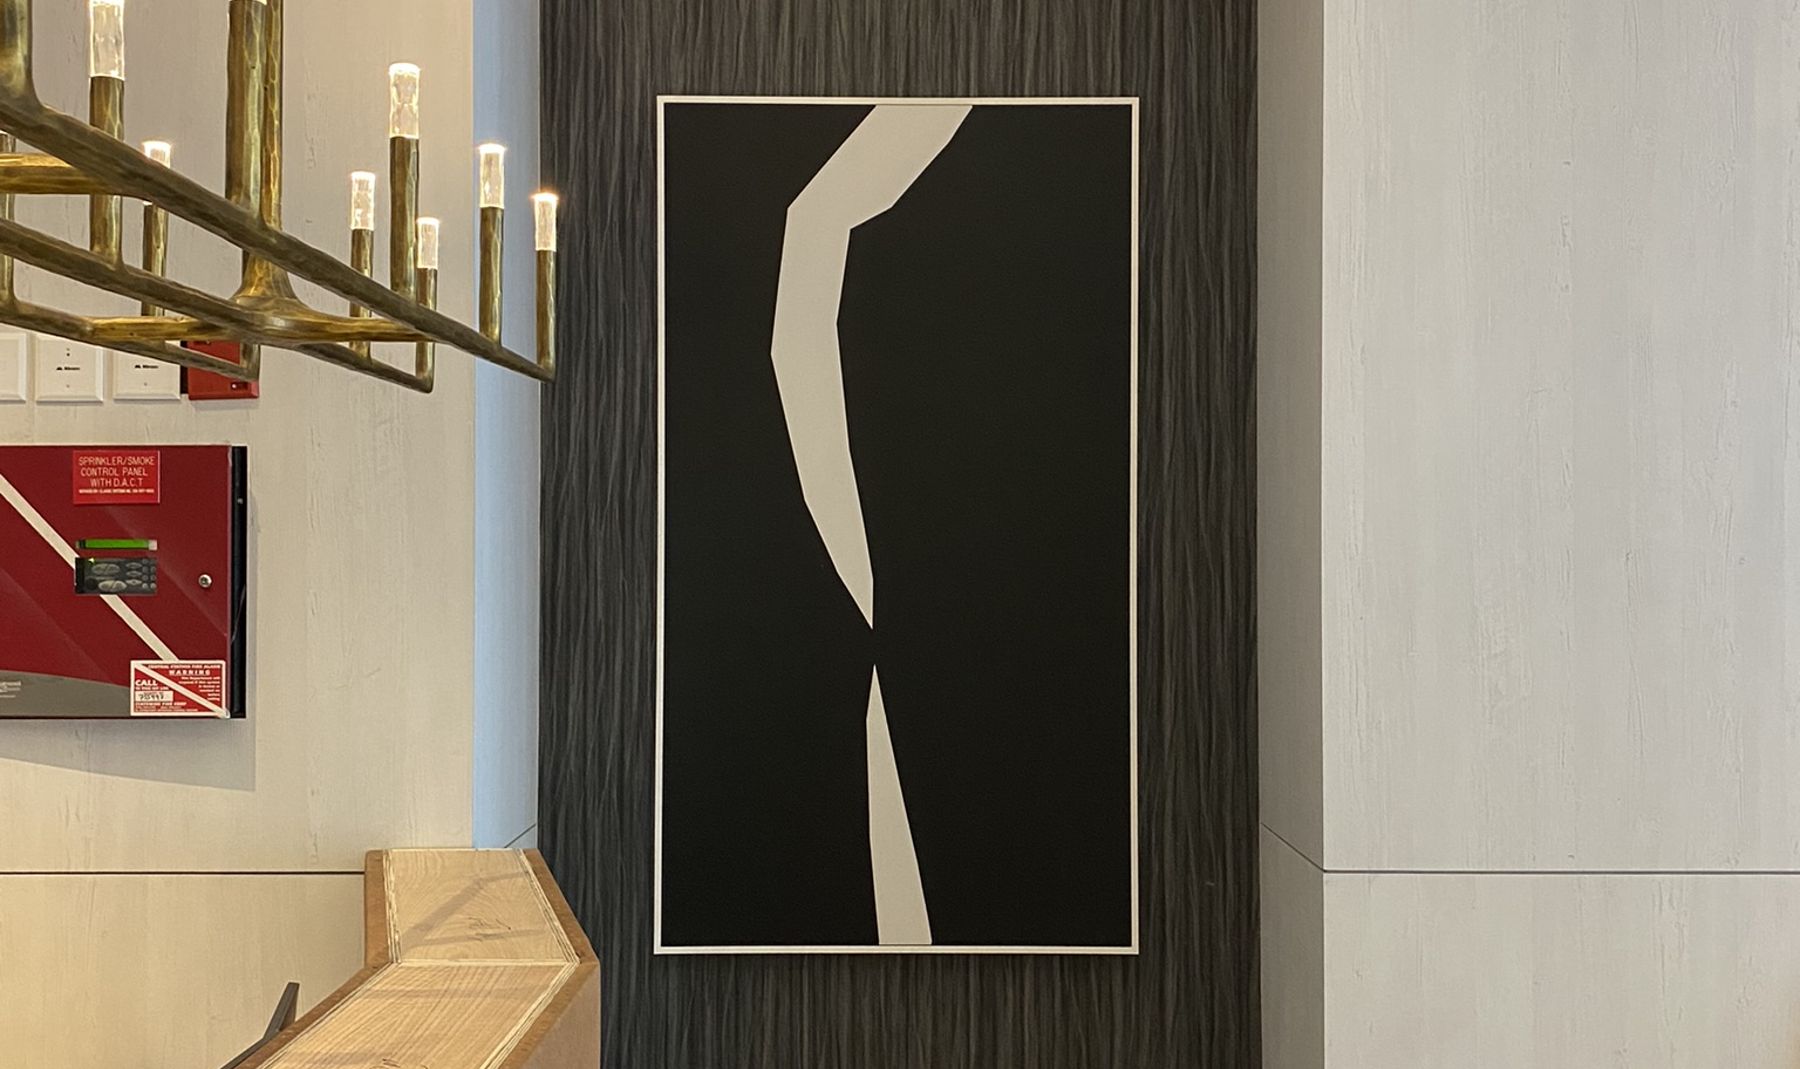 A piece of framed abstract art hung in a commercial building